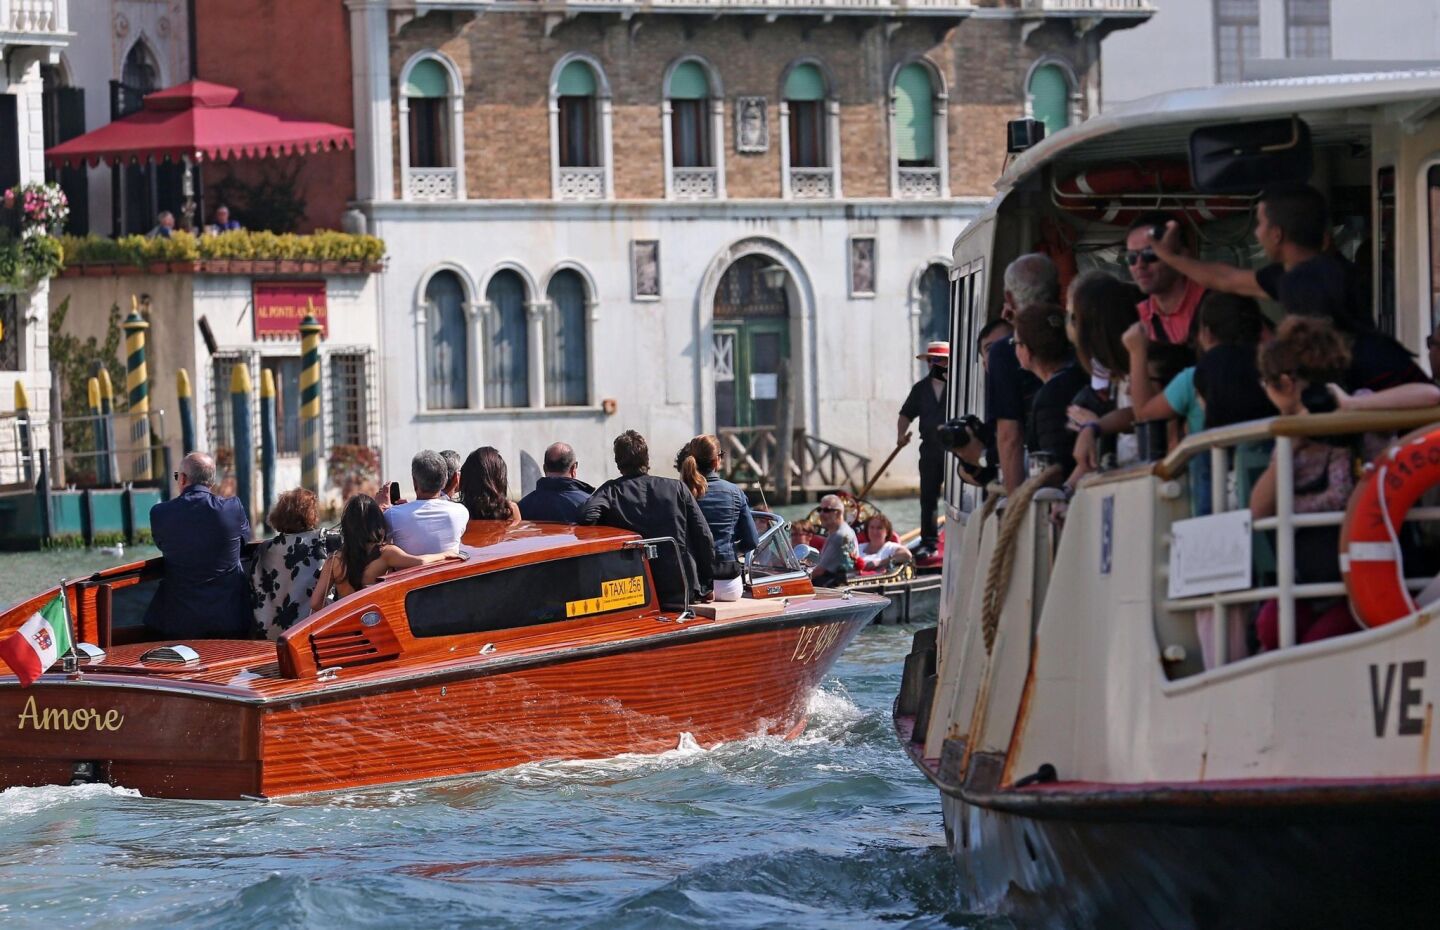 Lucky passengers on a tourist boat get a glimpse of George Clooney and company headed for their hotel.